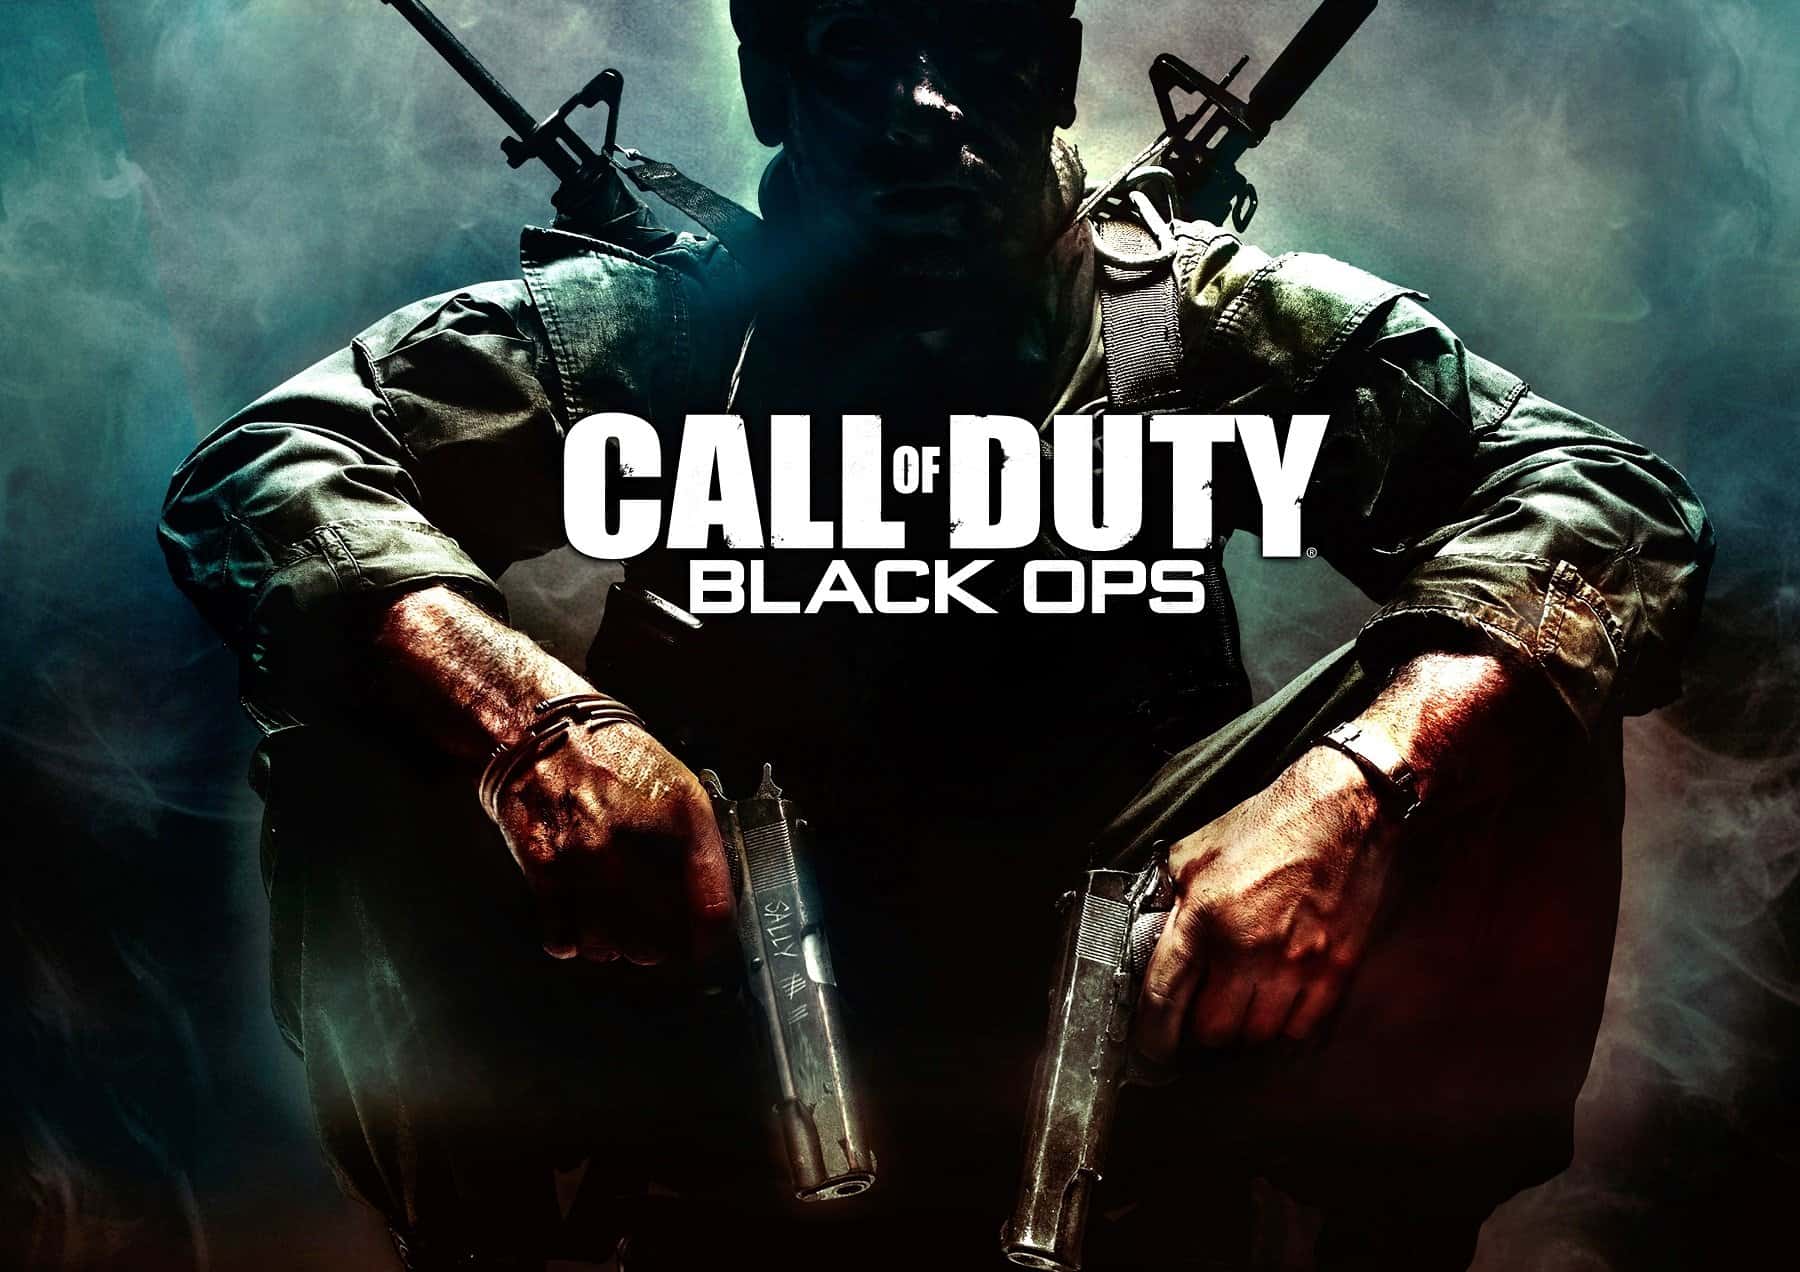 PC Call of Duty Black Ops SaveGame 100%